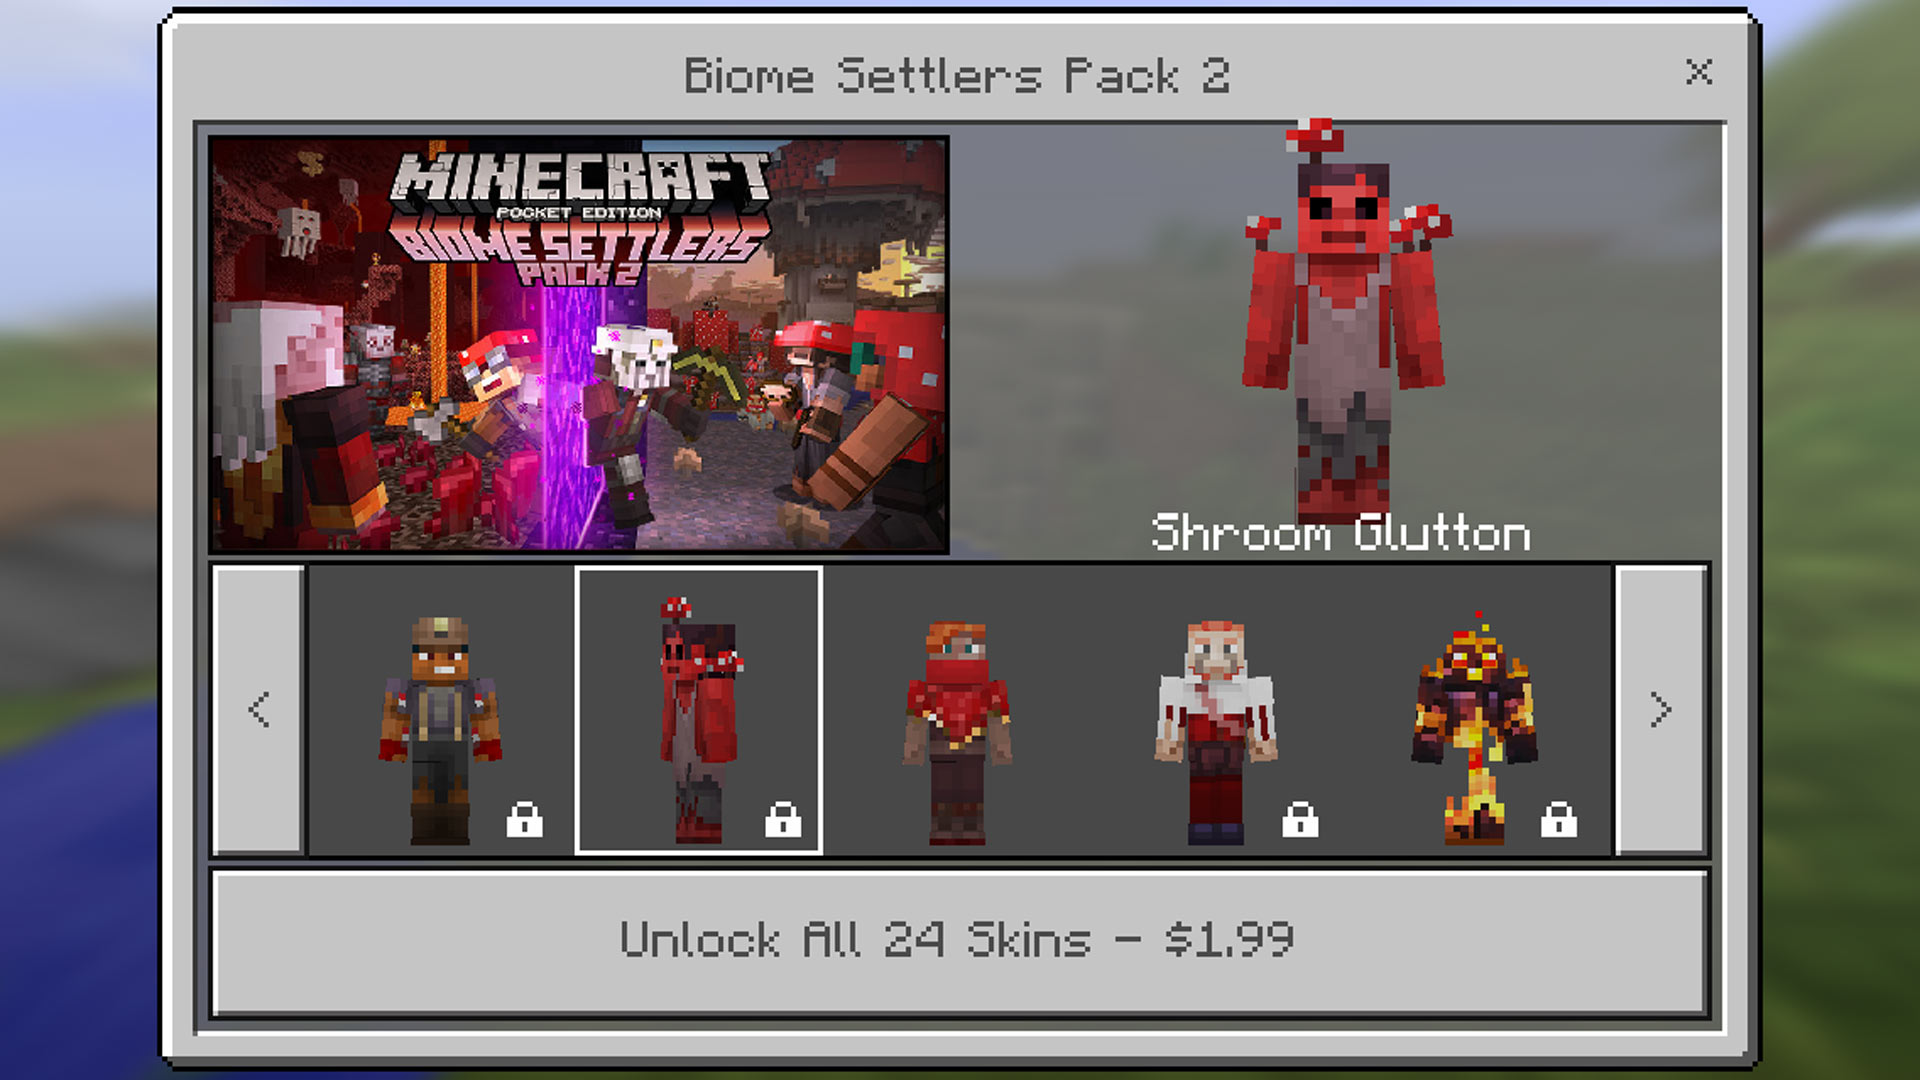 Minecraft Pocket Edition: Biome Settlers Skin Pack 2